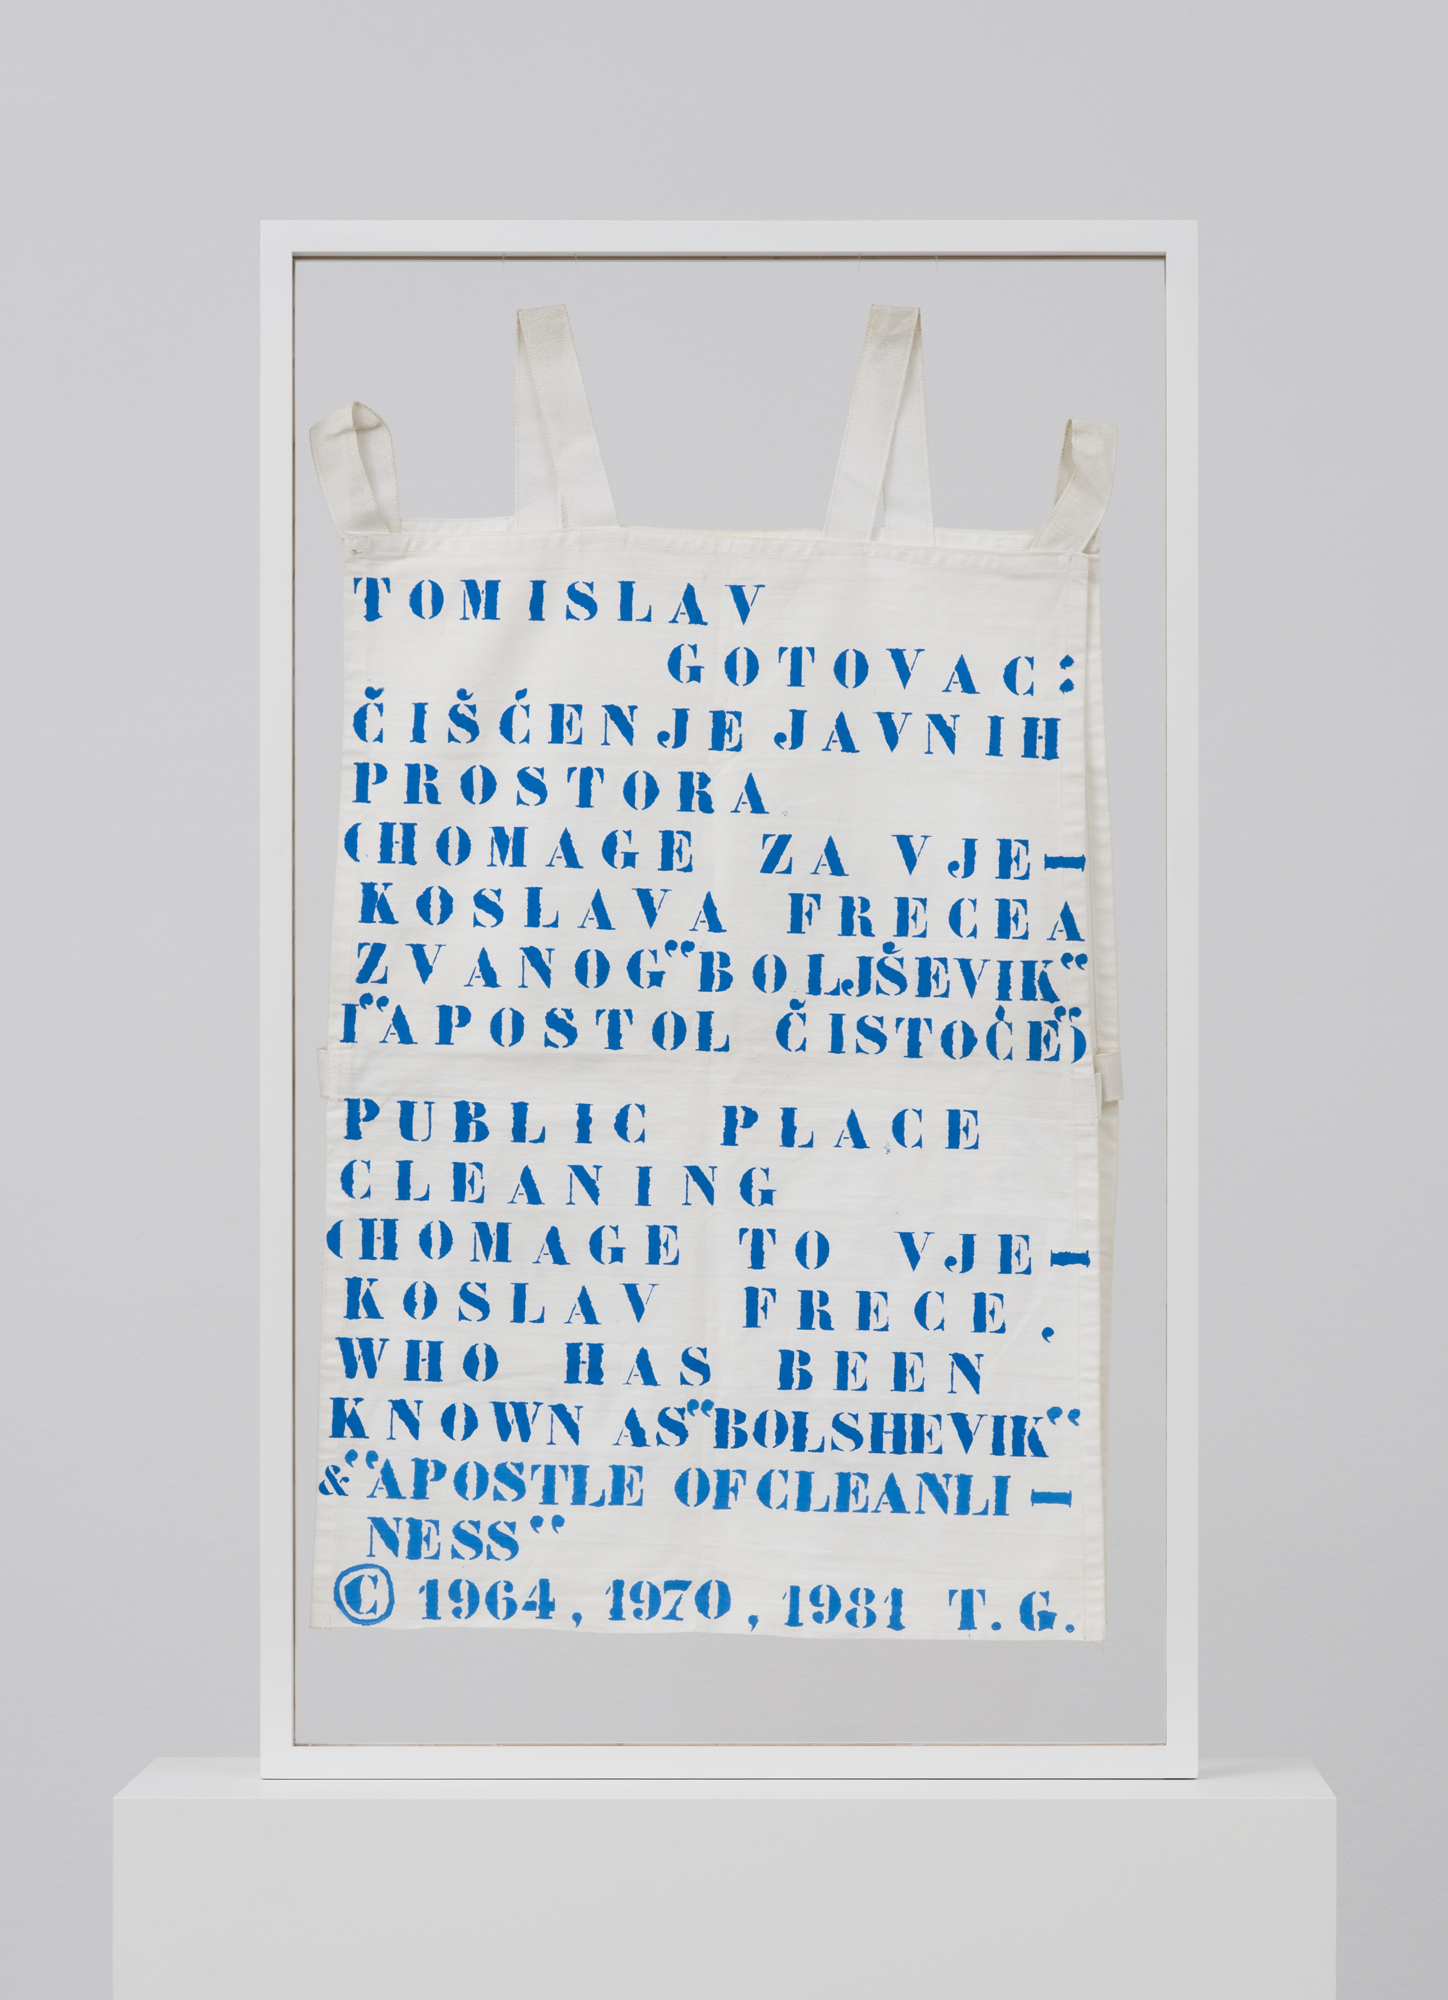 Cleaning of Public Spaces, artefact from the performance, hand-made apron, 1981